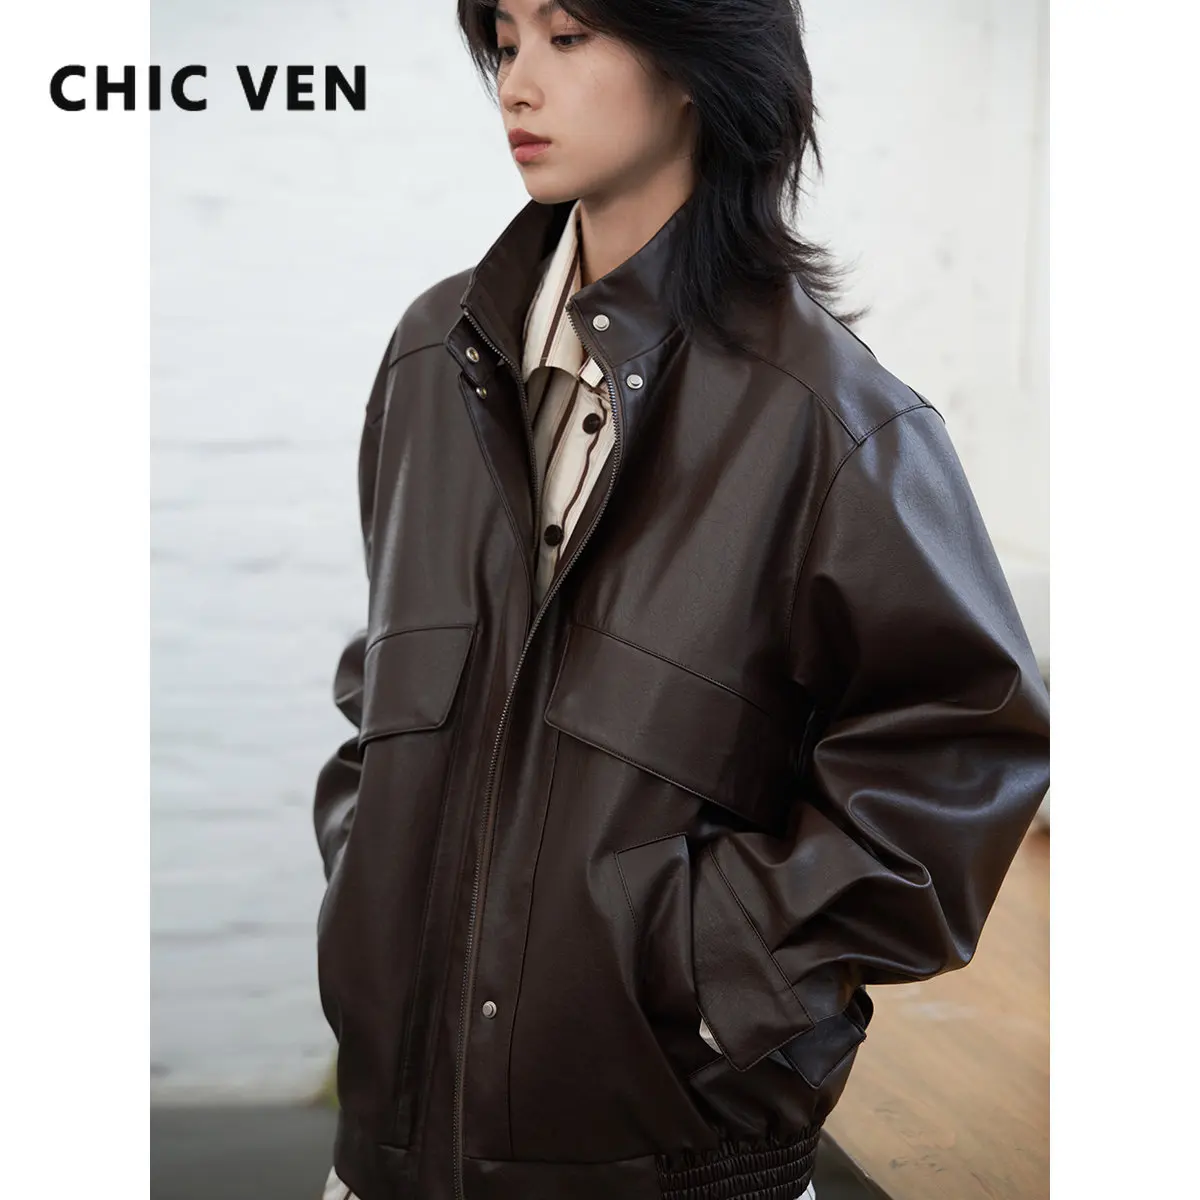 CHIC VEN Vintage Unisex Stand Collar PU Faux Leather Coat Women's Long Sleeve Jacket Female Top Lady Coat Spring Autumn 2022 enlarge